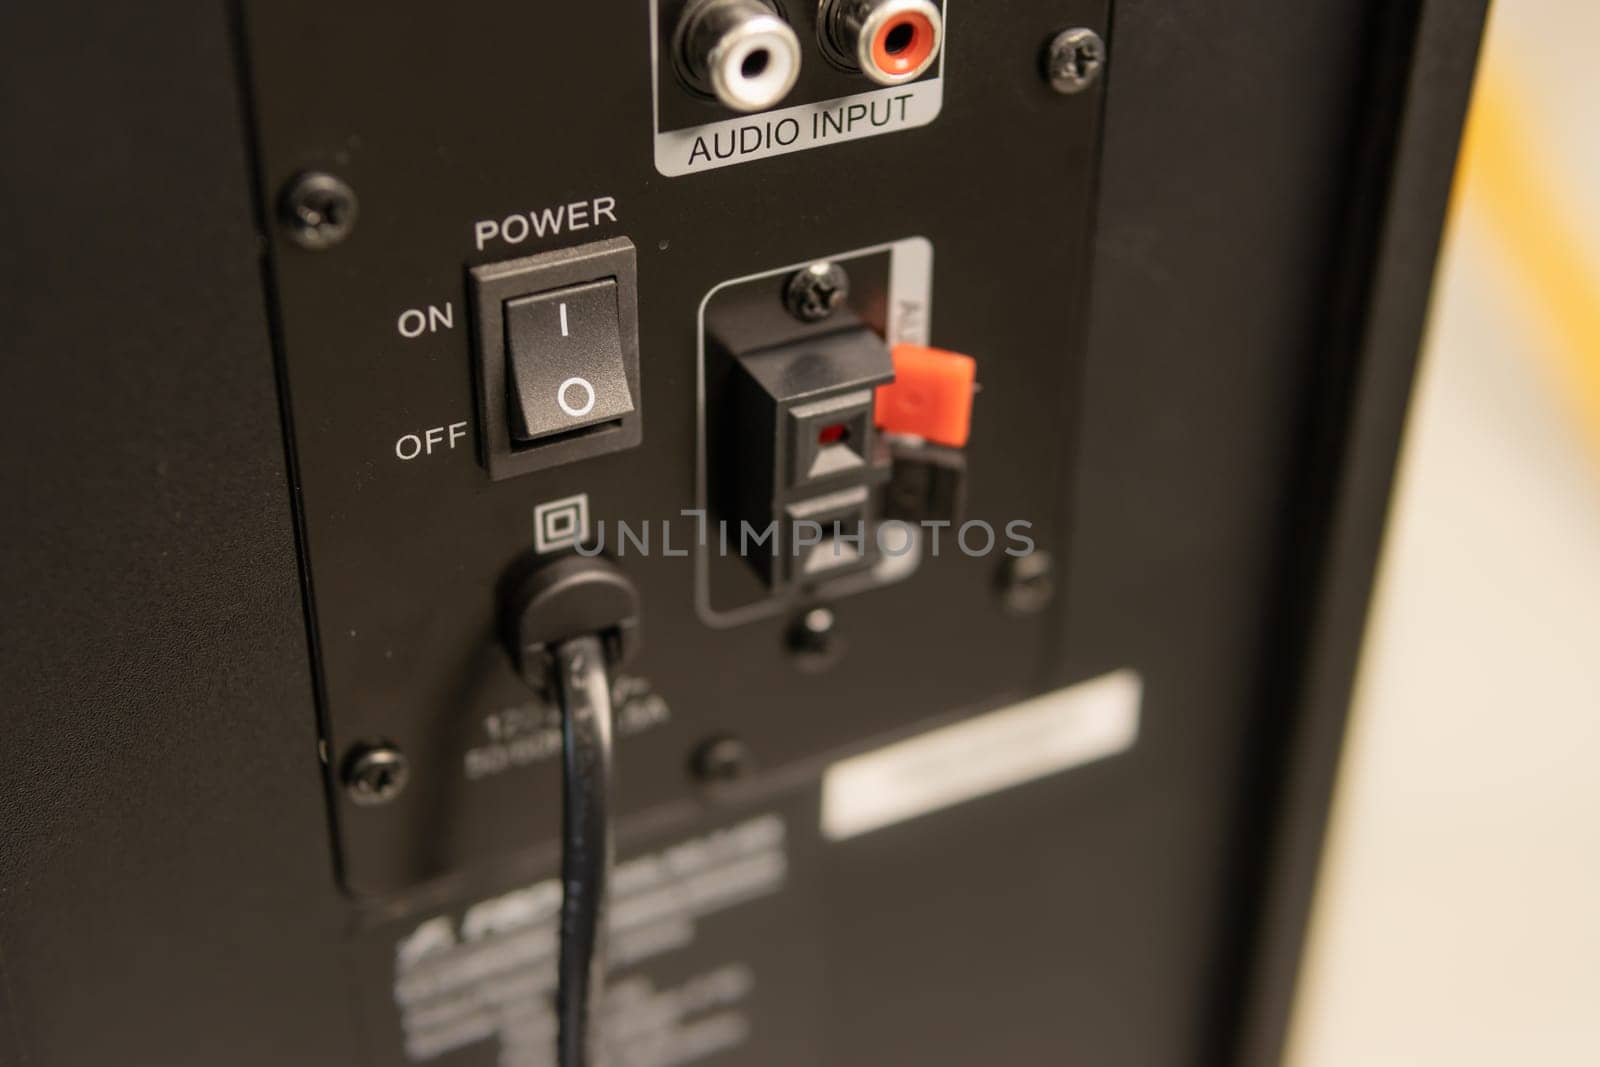 Close-up of the speaker connectors on the back of the AV receiver. High quality photo